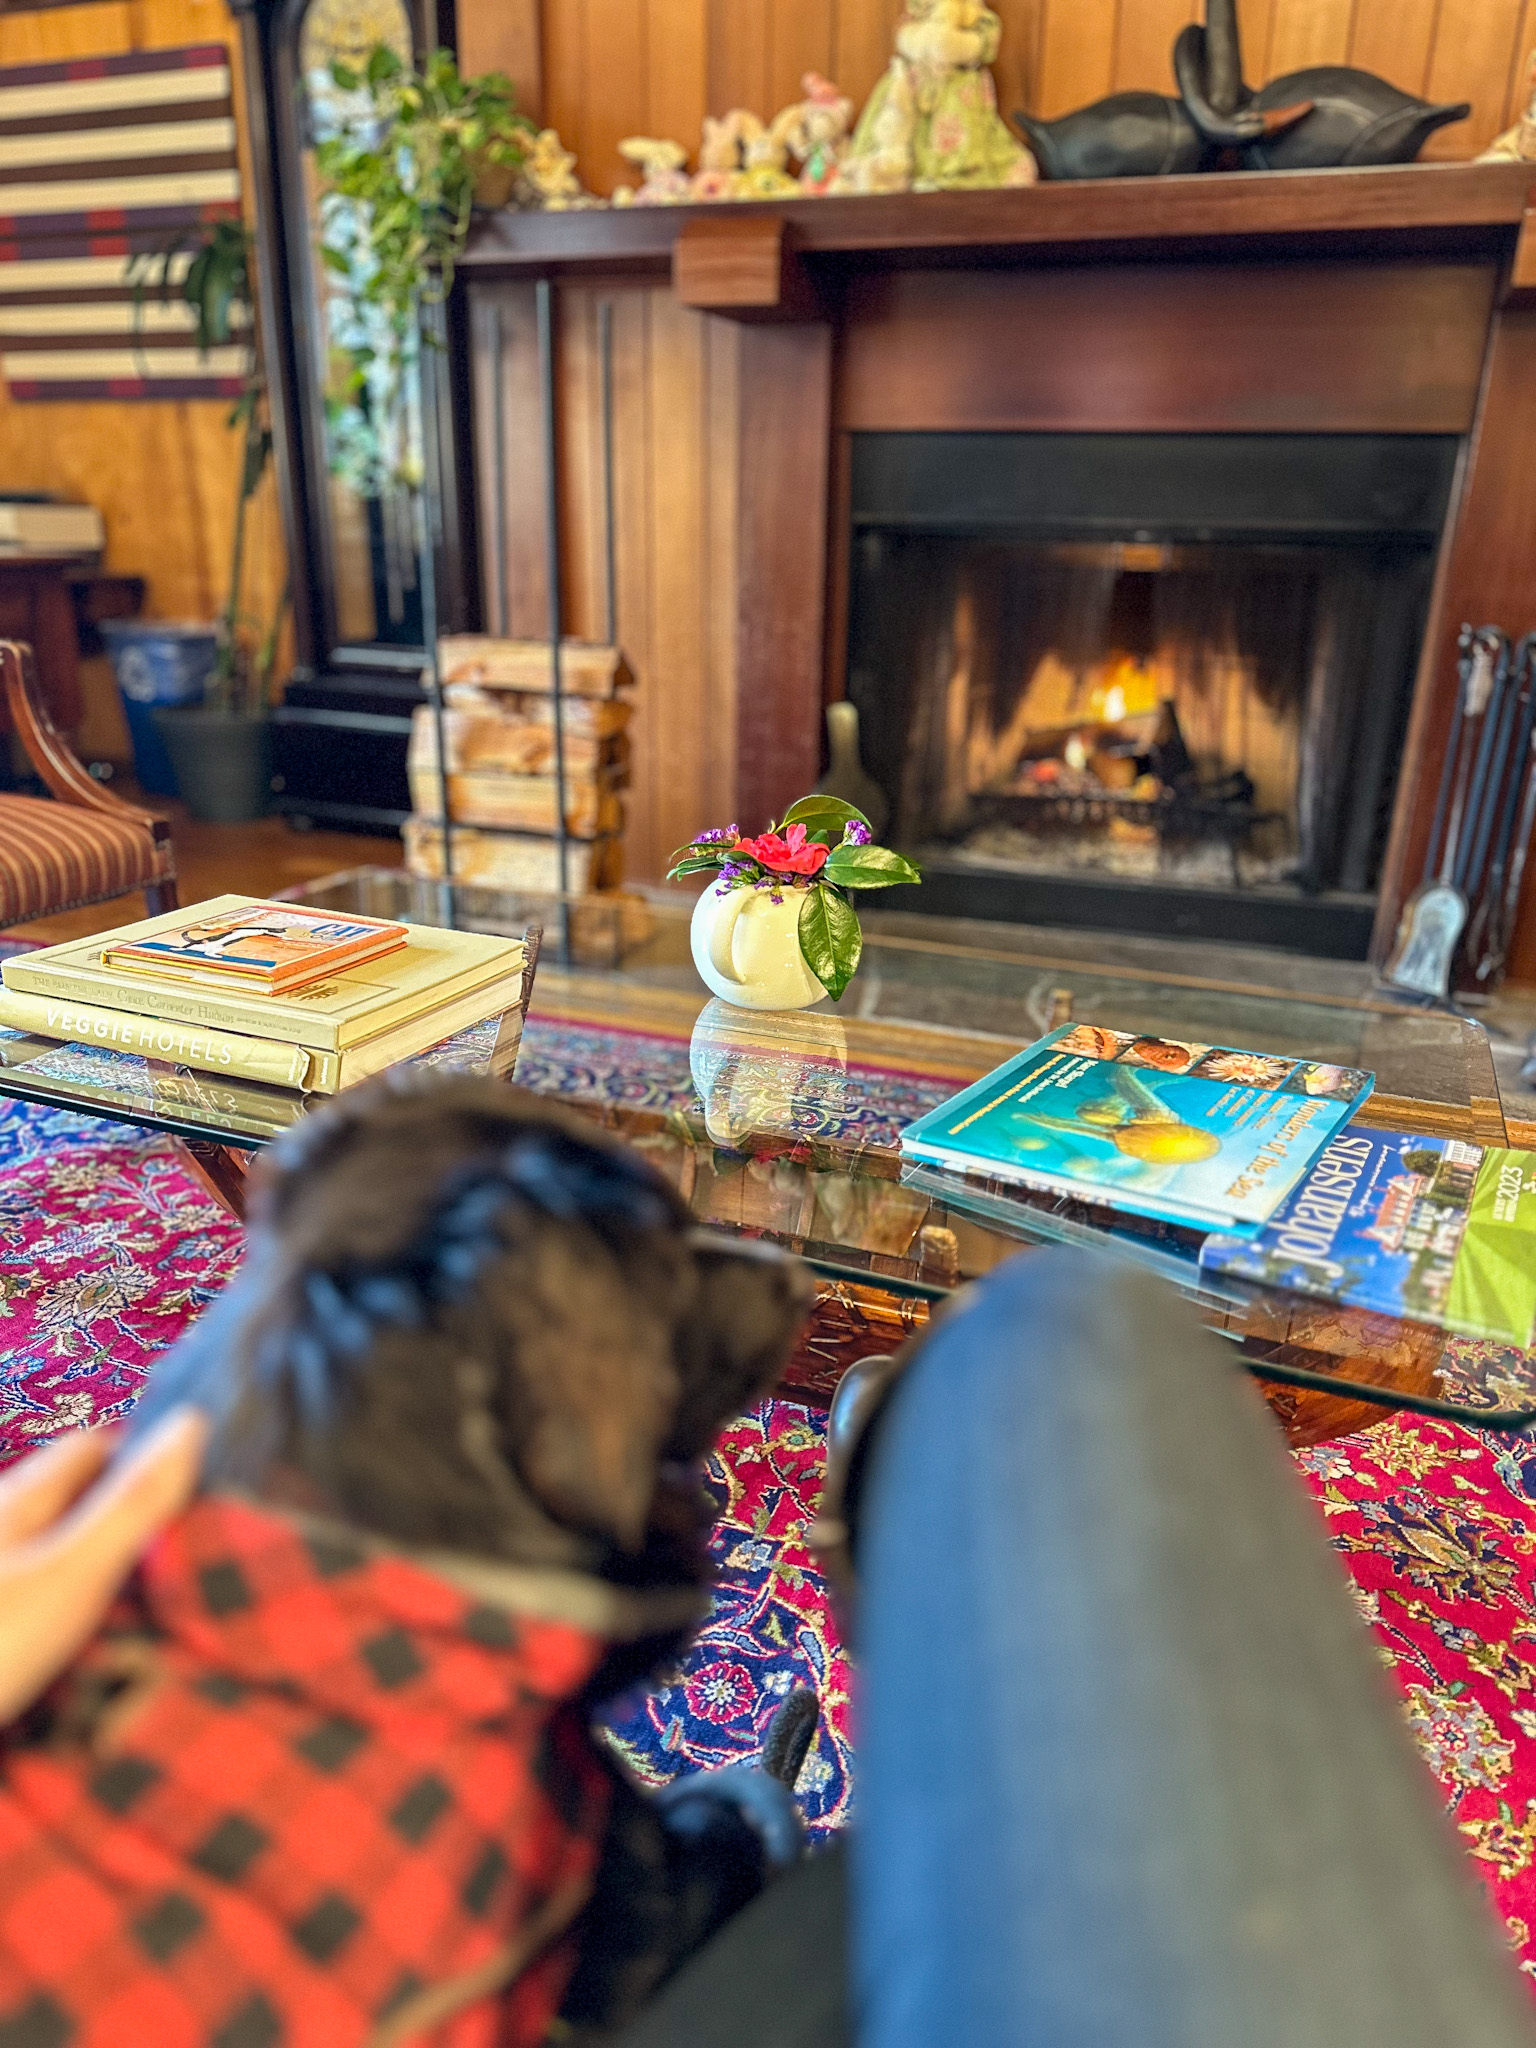 The Ultimate Dog Friendly Travel Guide to Mendocino California